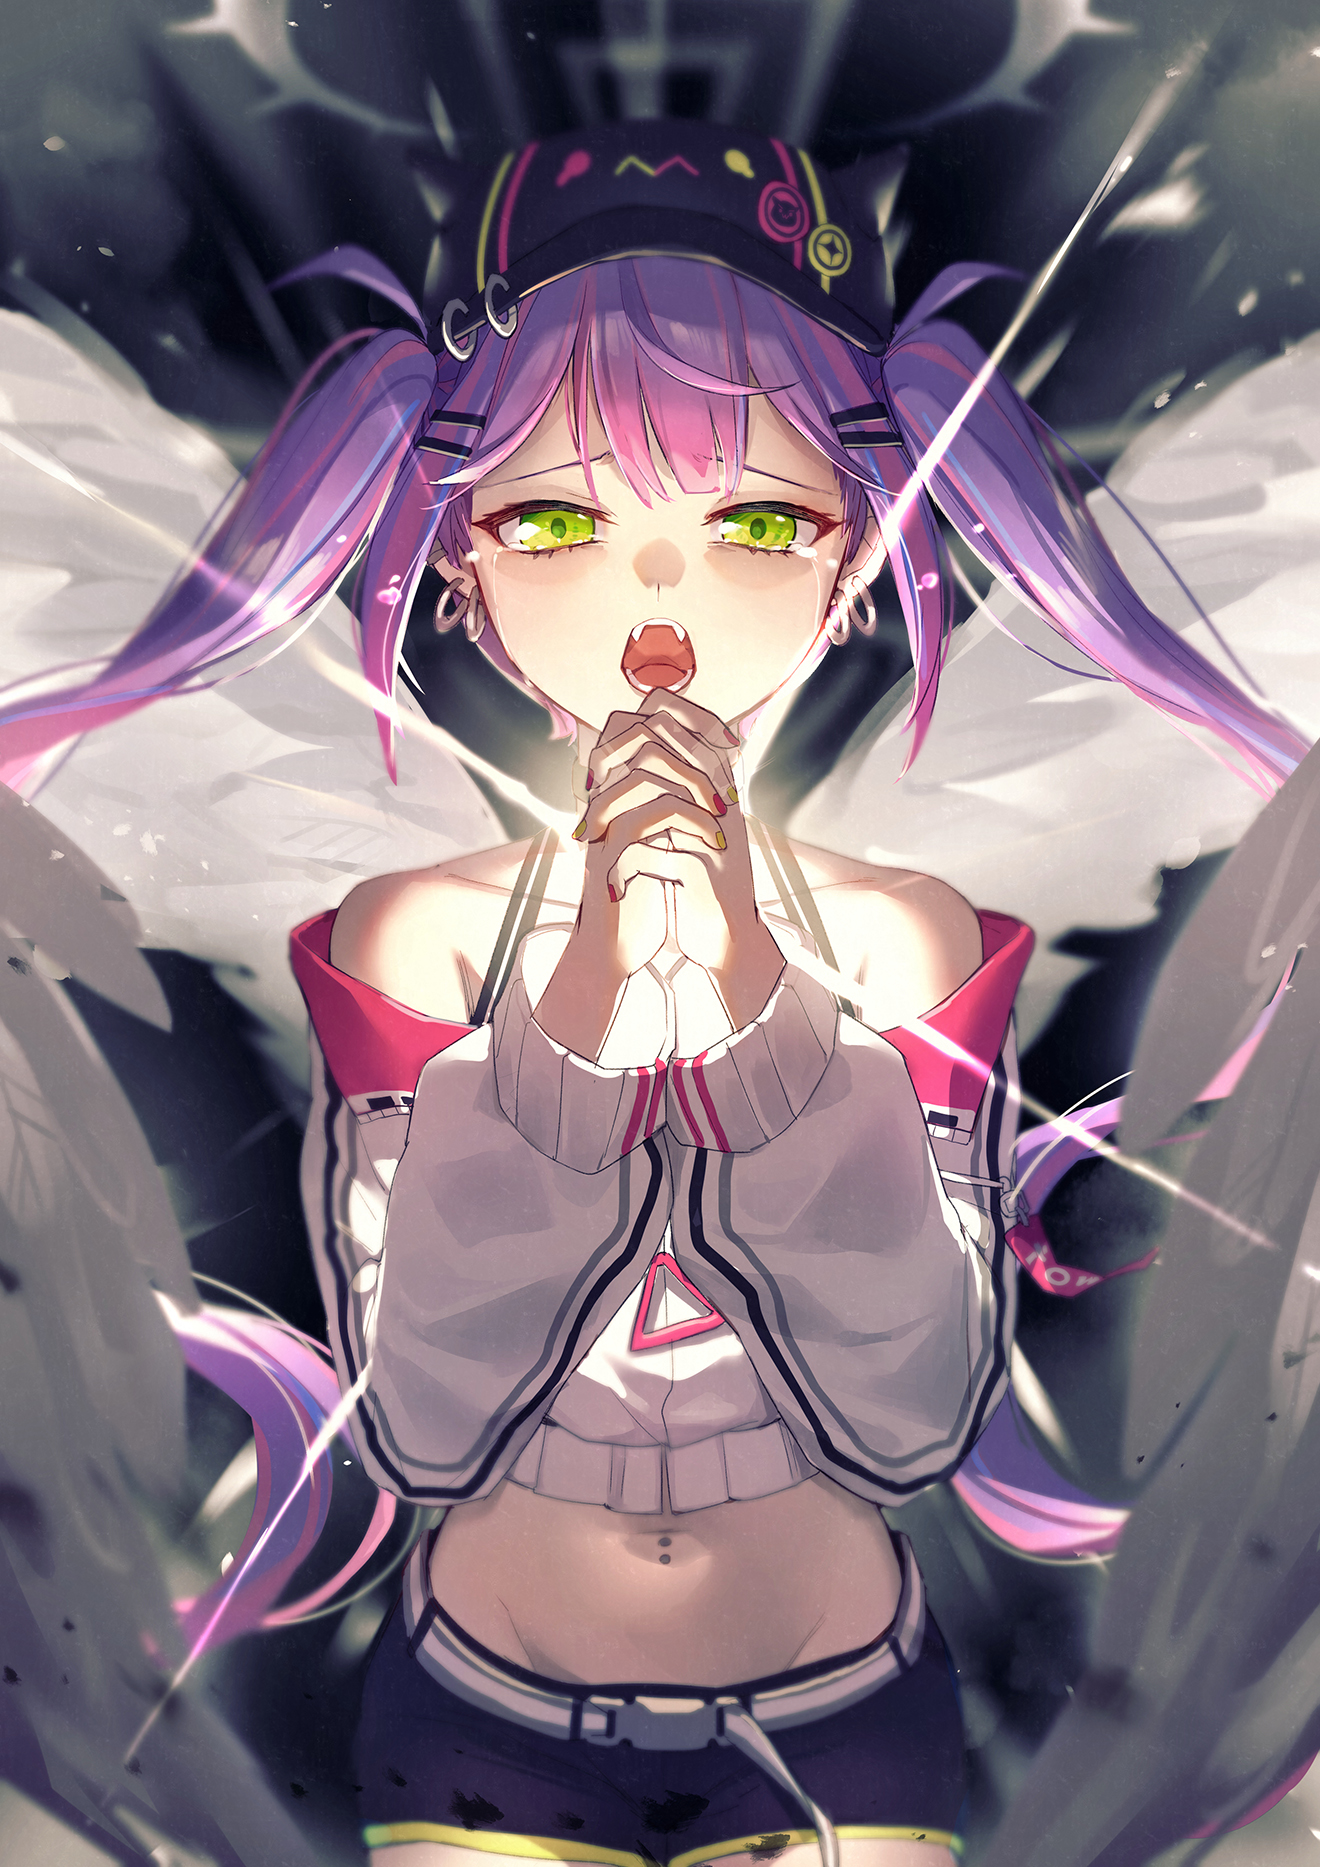 Anime 1320x1867 anime anime girls digital art artwork 2D portrait display frontal view green eyes purple hair twintails piercing tears praying wings belly short shorts bare shoulders mr.Lime Hololive Tokoyami Towa folded hands